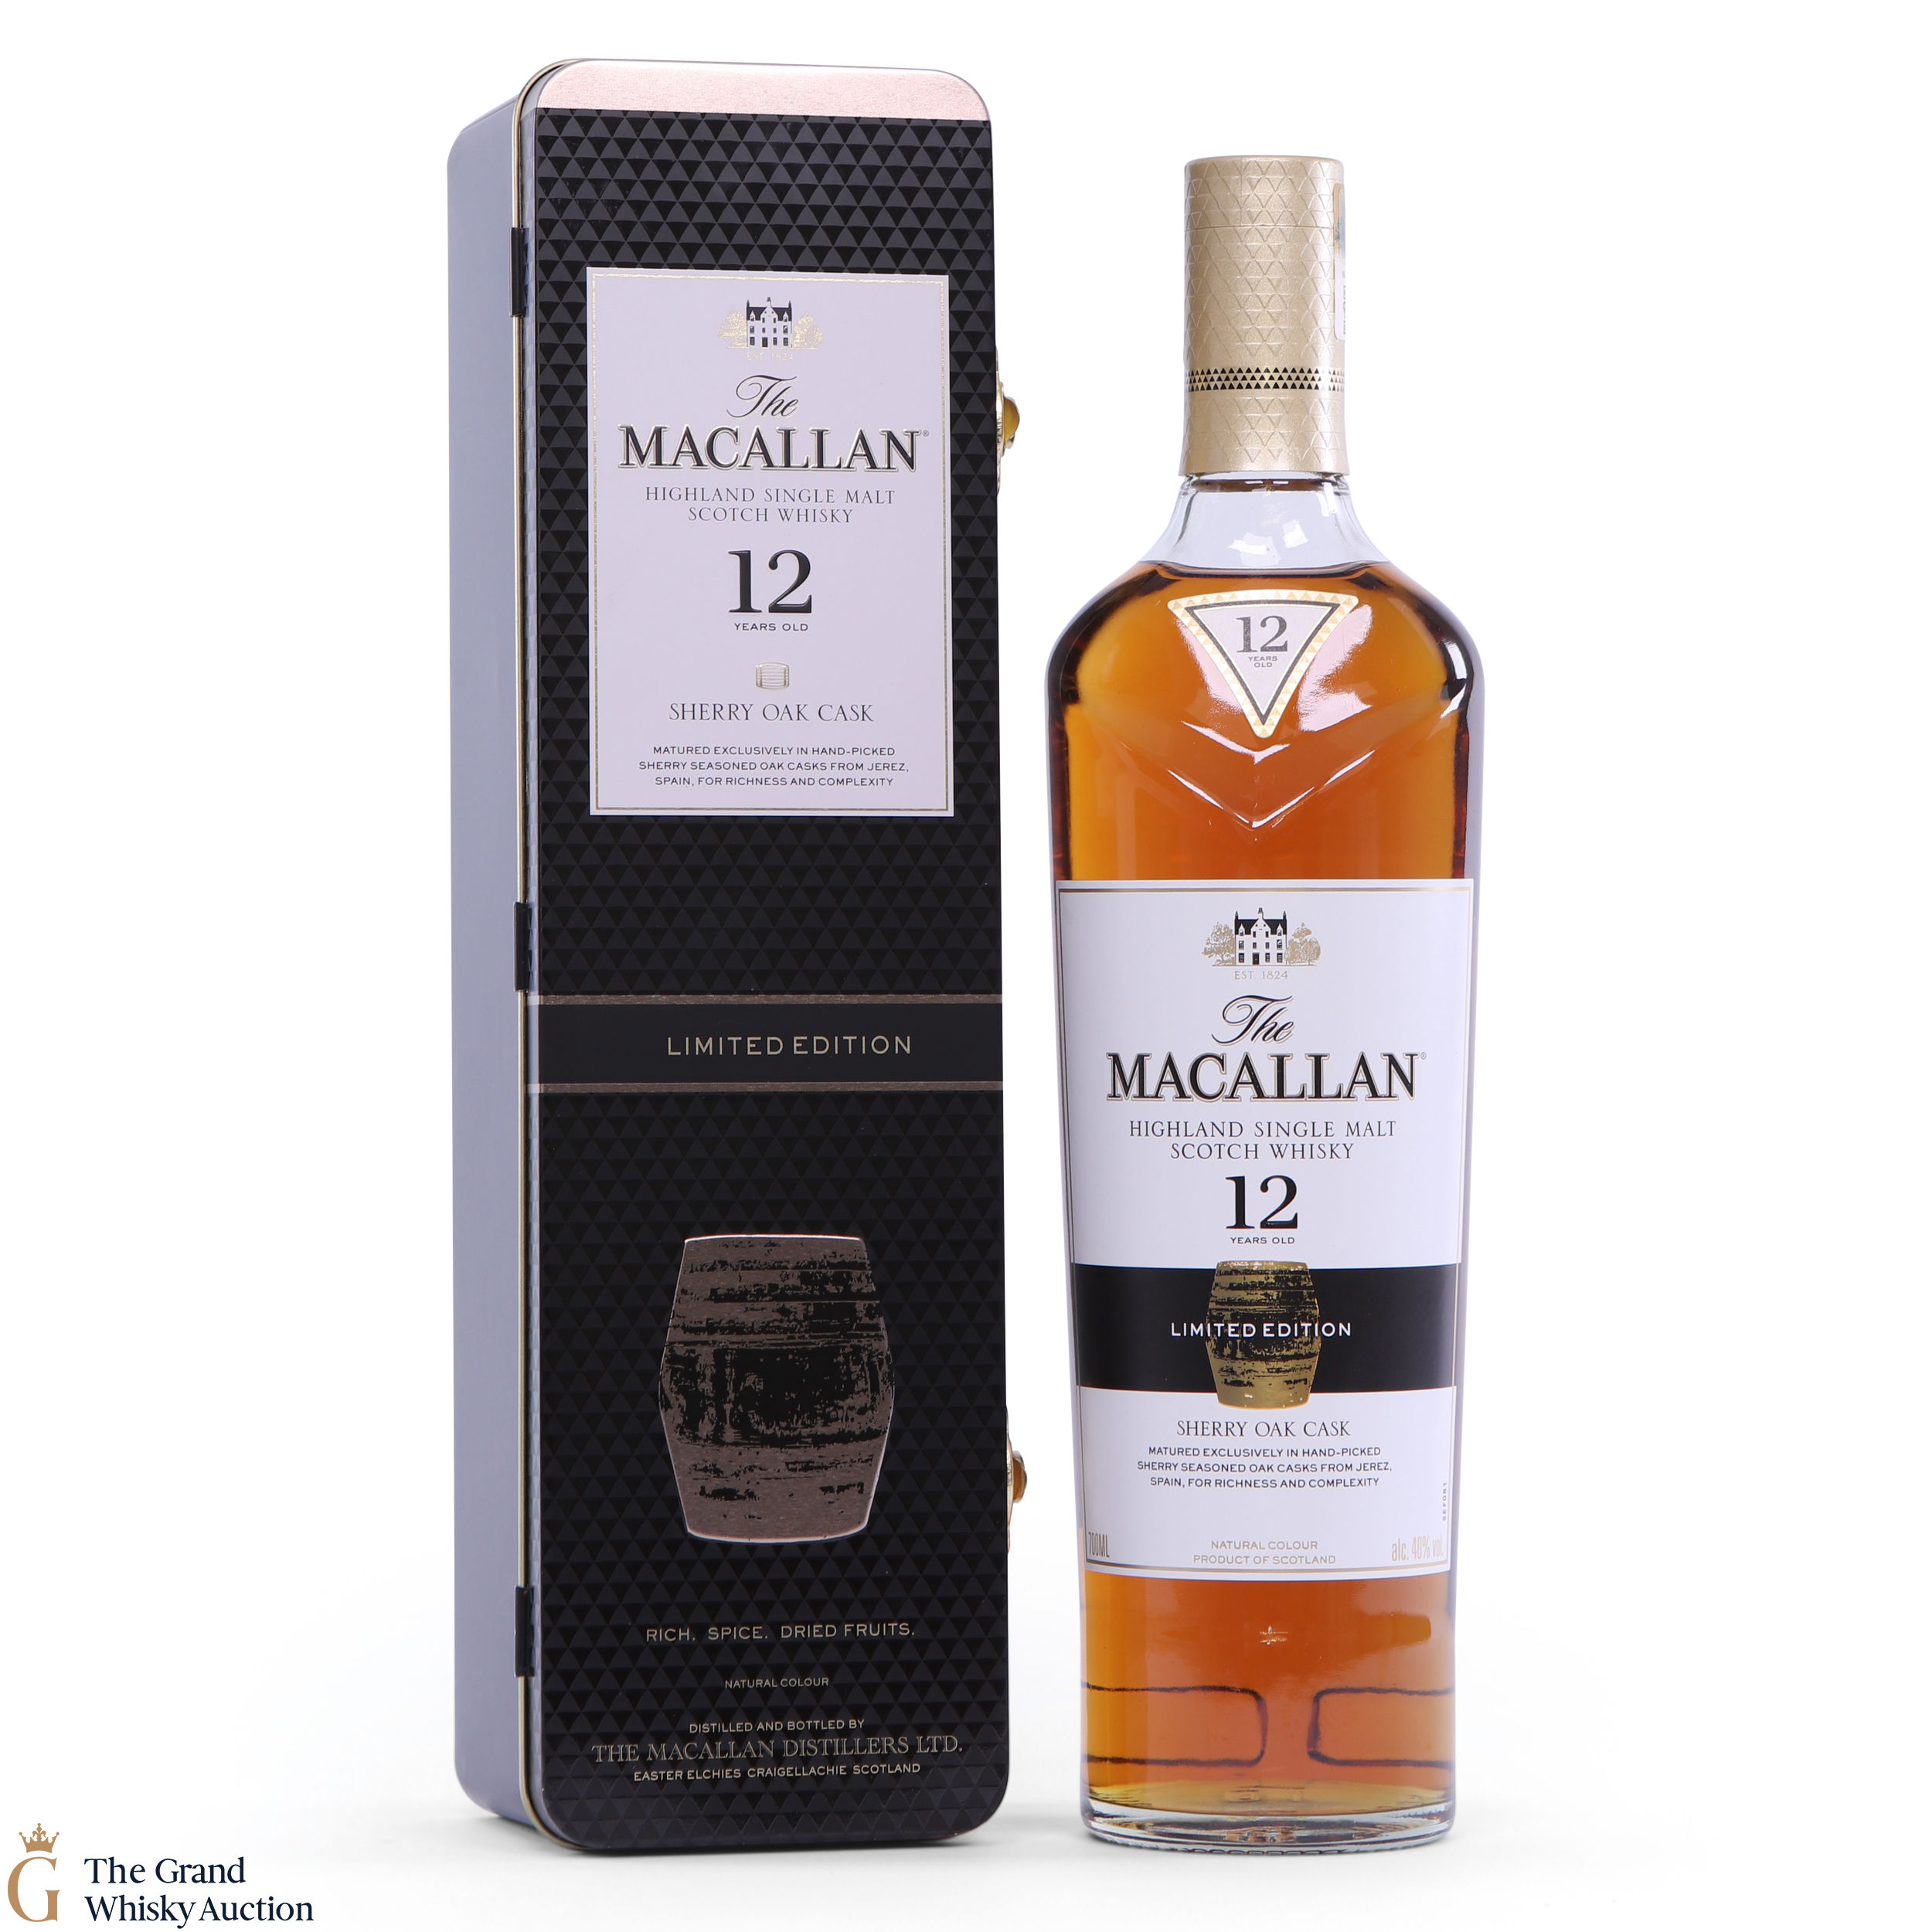 Macallan 12 Year Old Sherry Oak Limited Edition Tin Auction The Grand Whisky Auction